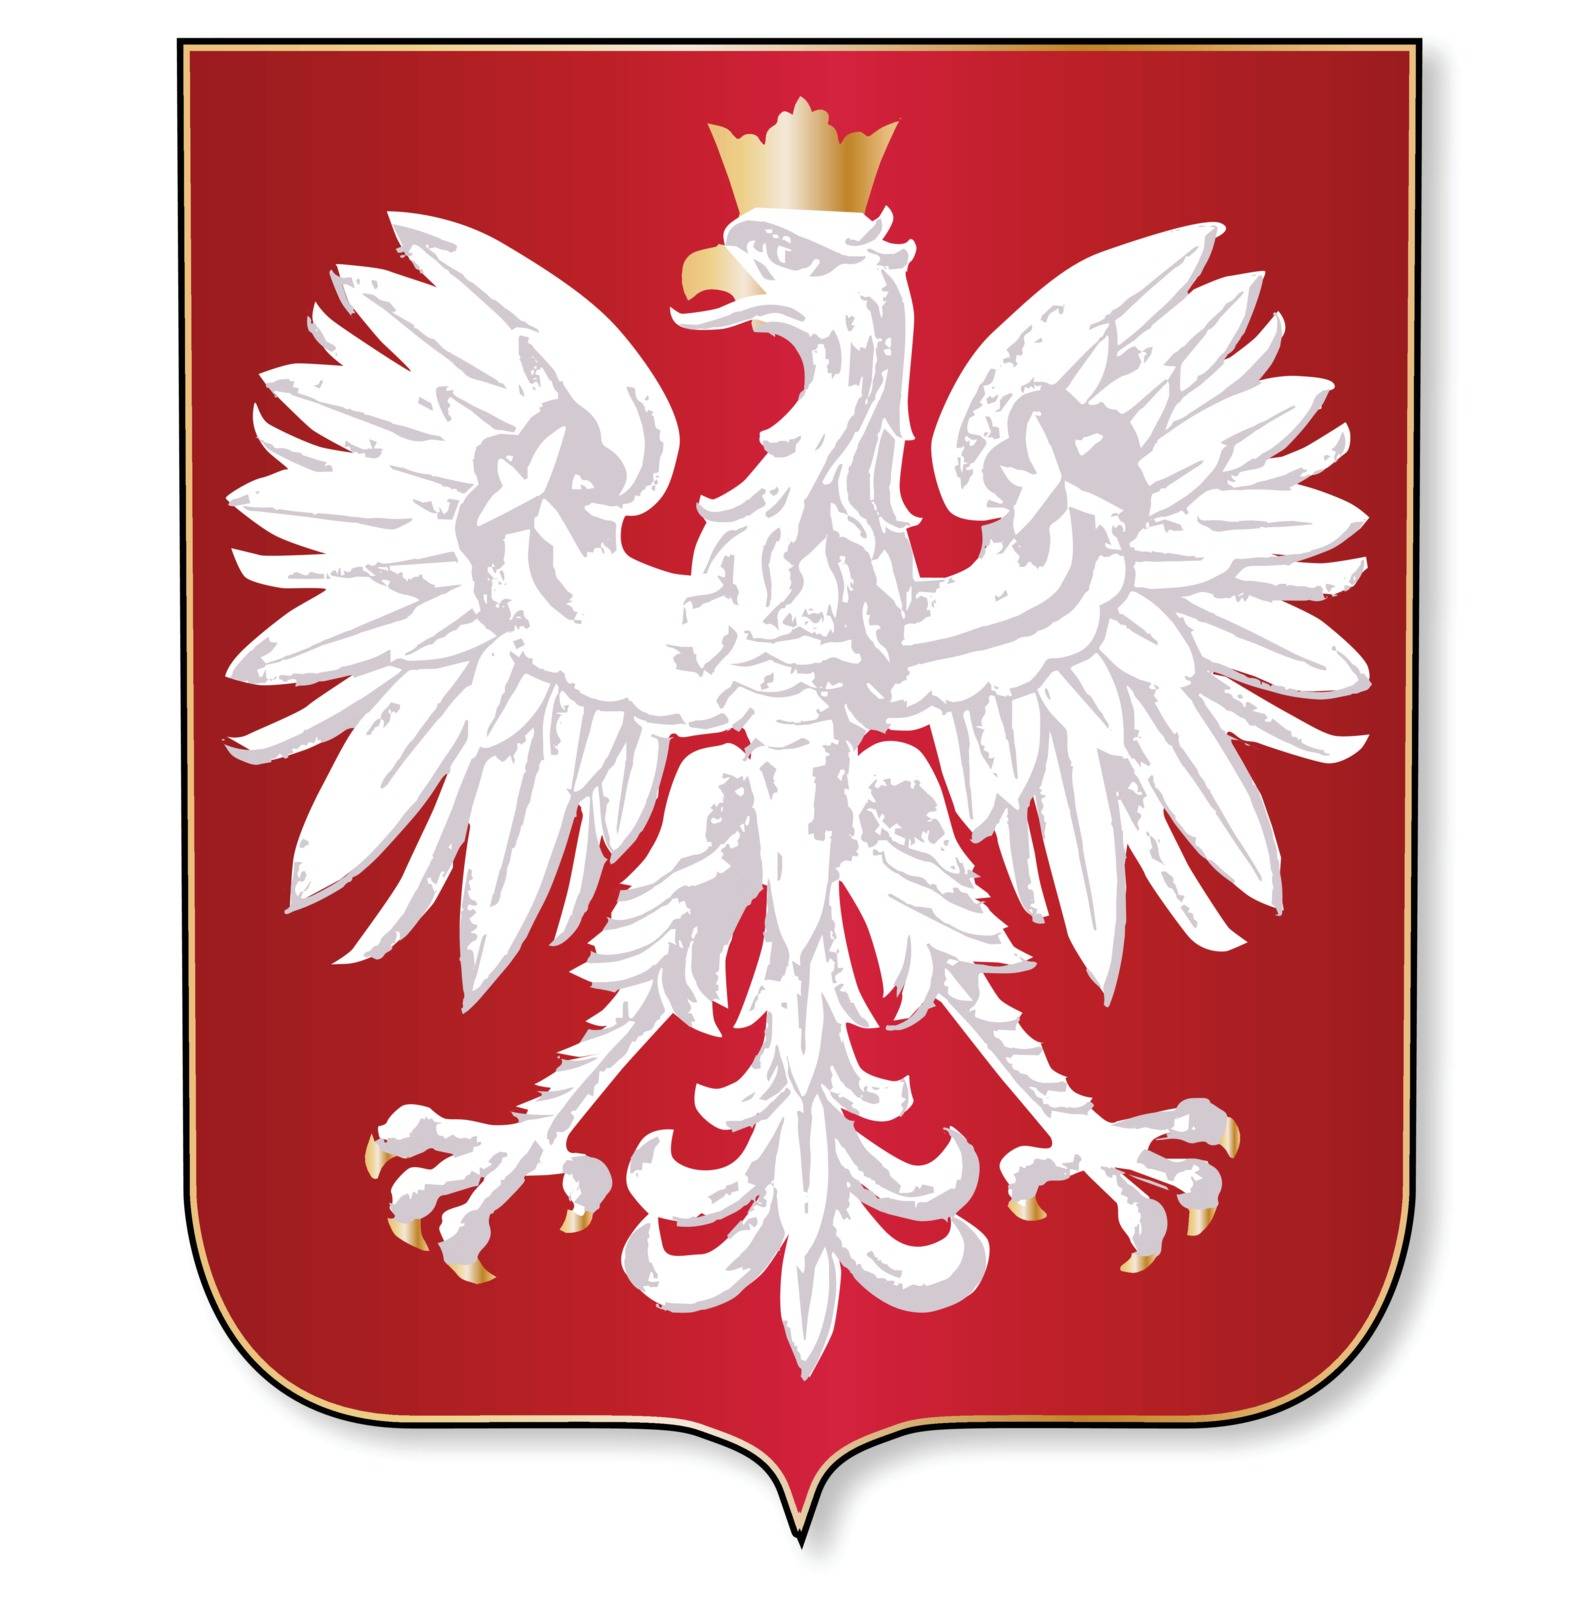 The polish crest upon a red shield over a white background